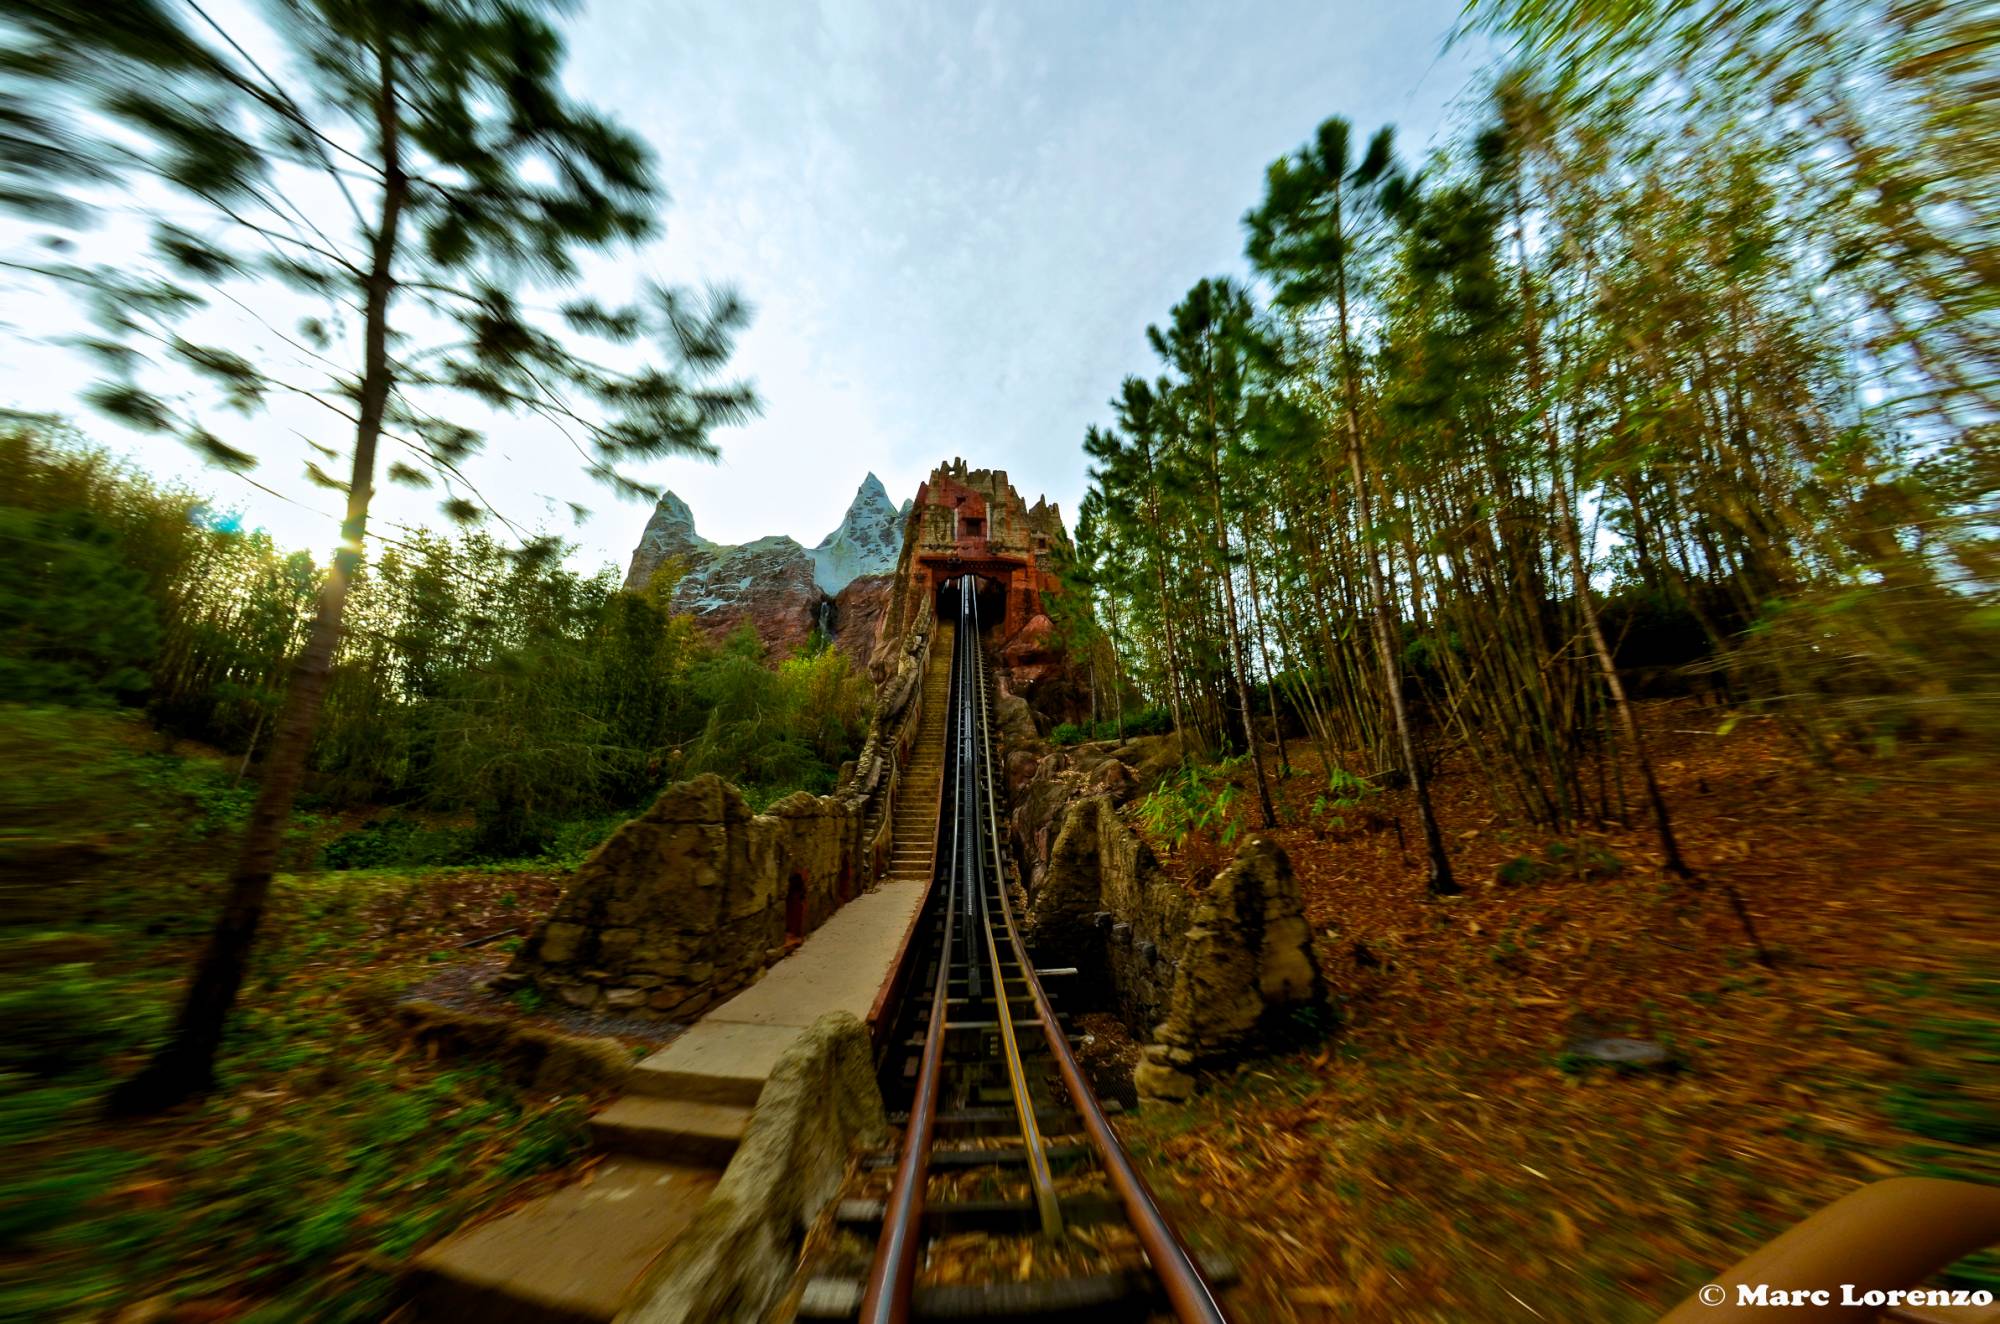 Expedition Everest on Ride Photo Up the Hill